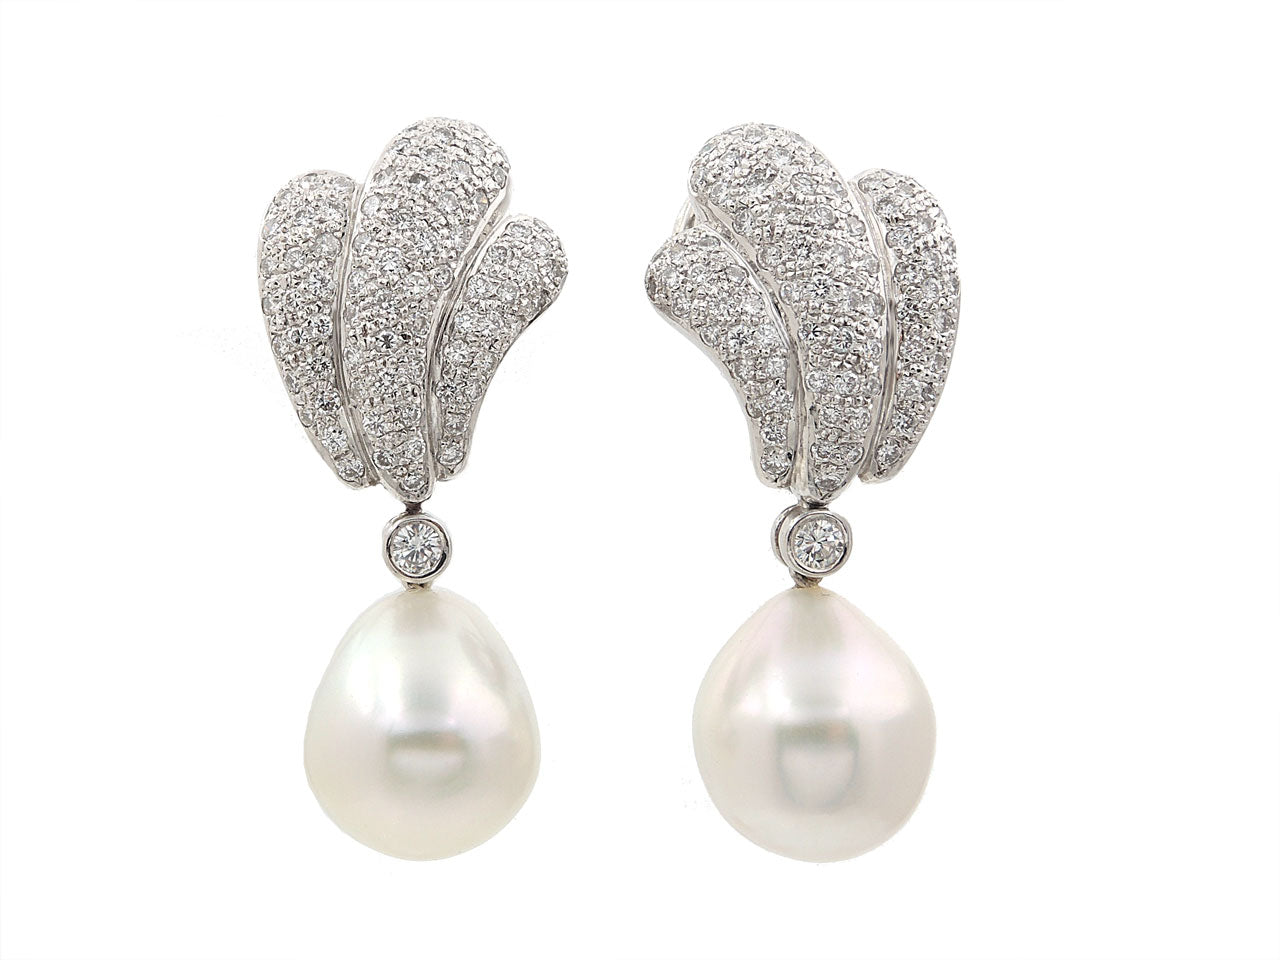 Baroque Pearl and Diamond Earrings in 18K White Gold